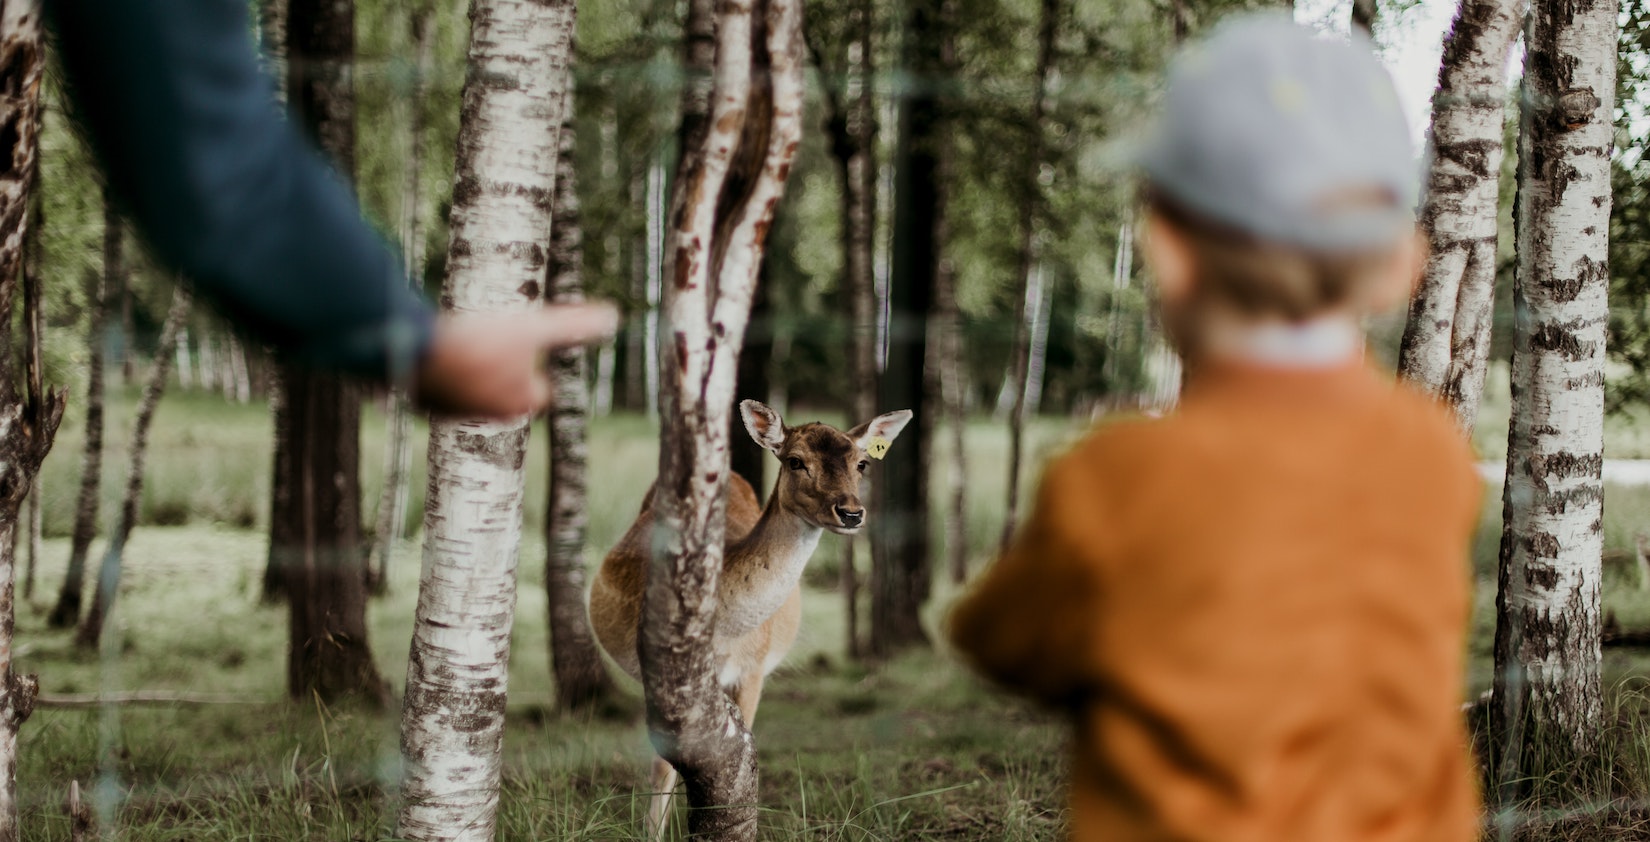 Little kid with an adult near a baby deer.